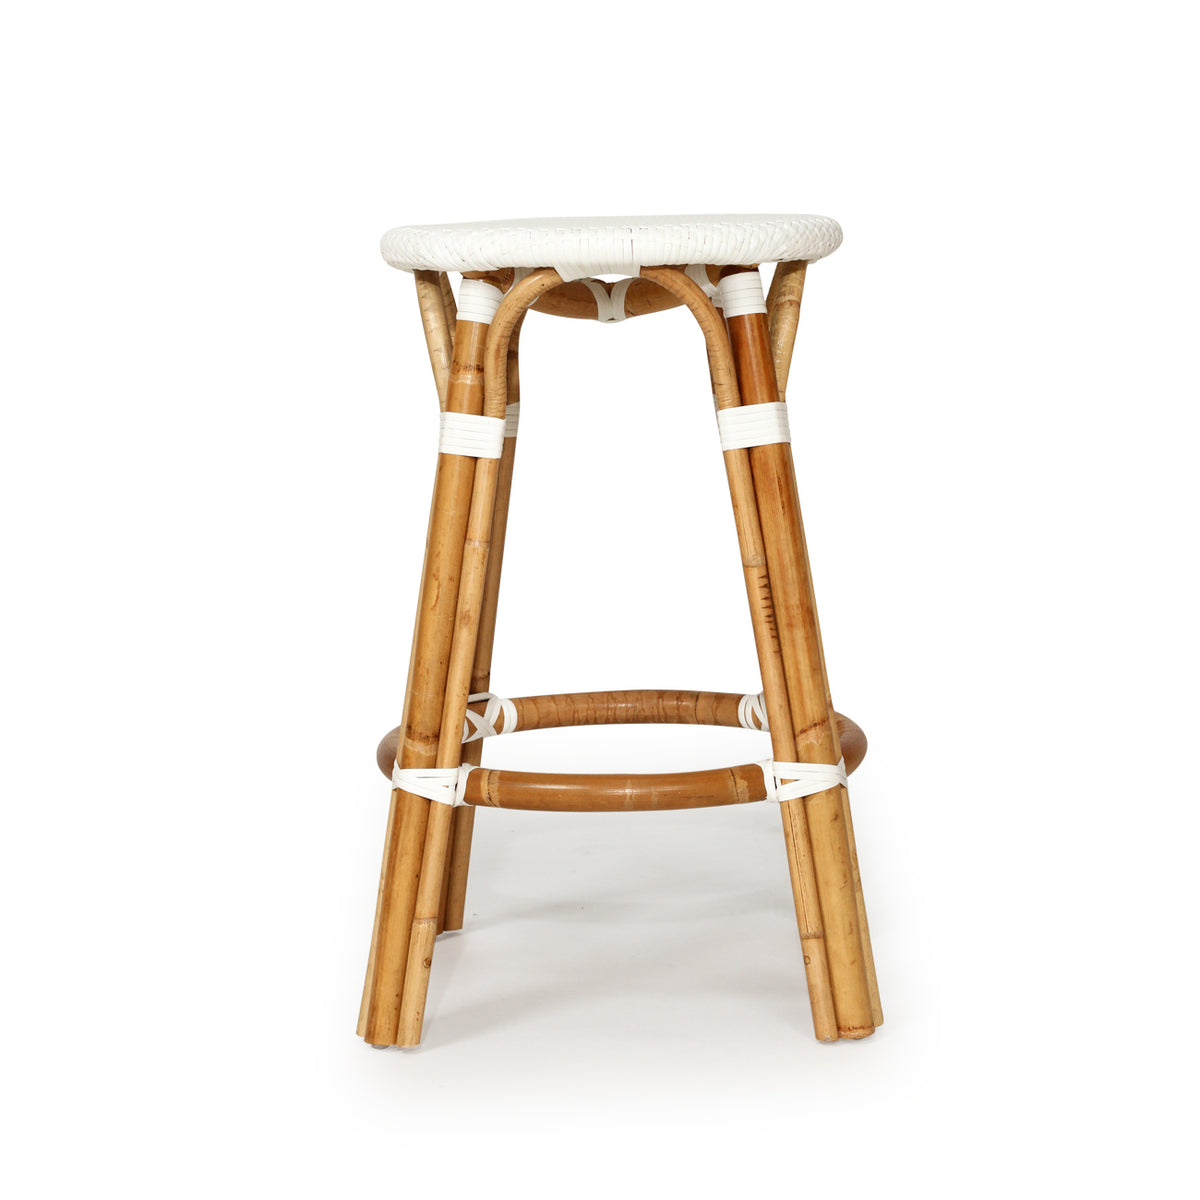 Solace Rattan Backless Counter Stool – White - Notbrand